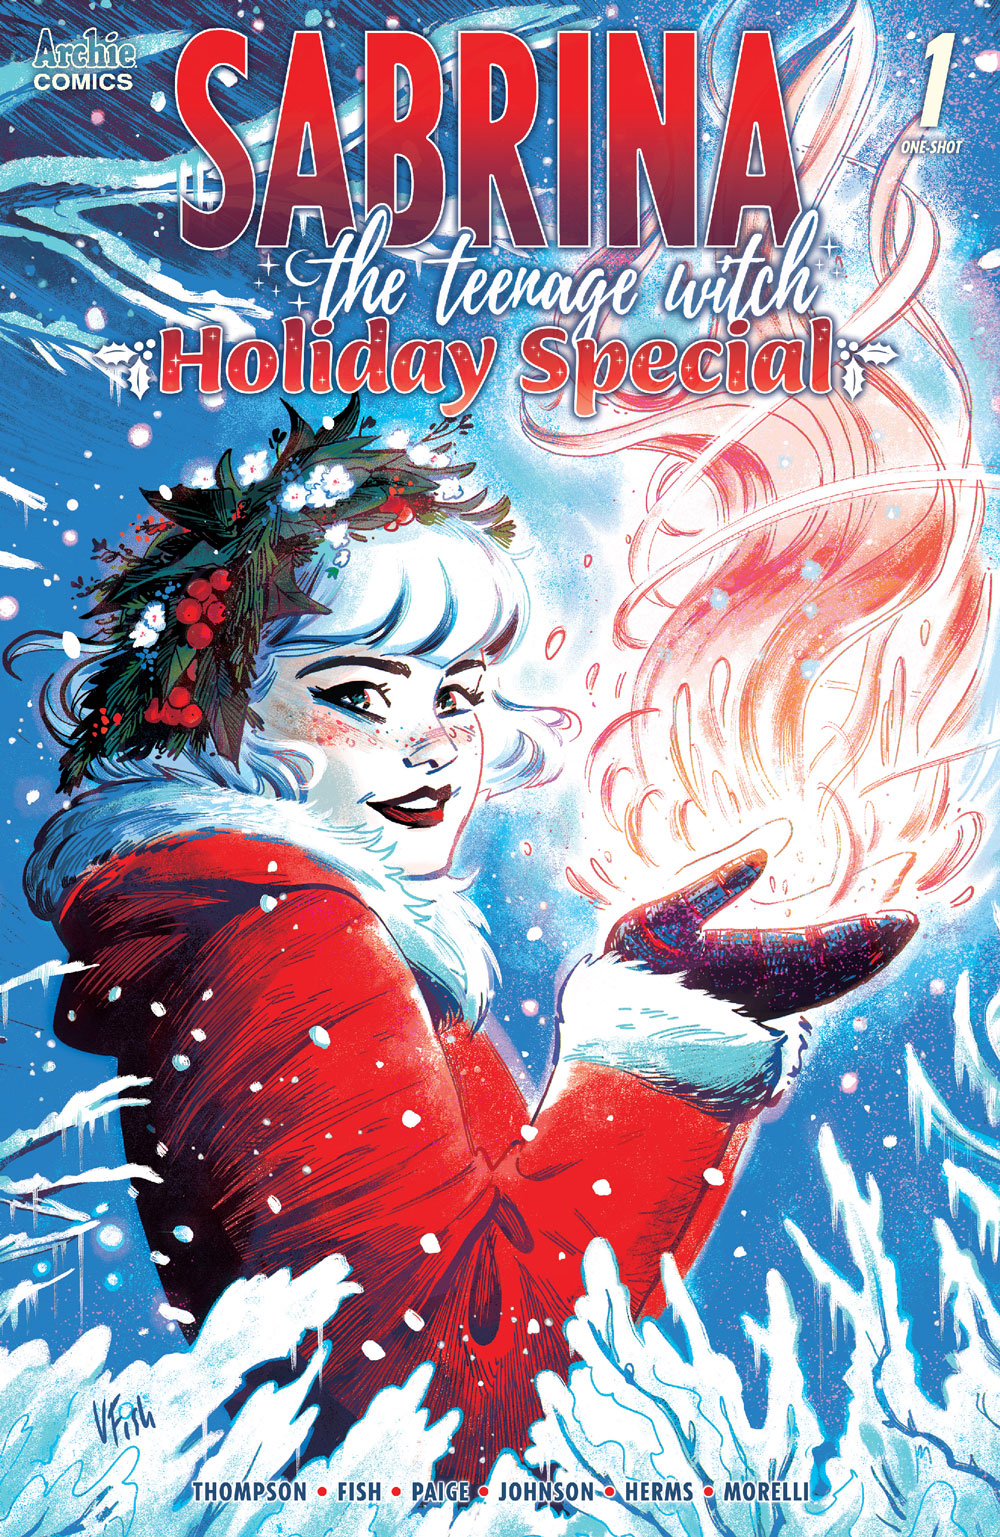 The cover of SABRINA HOLIDAY SPECIAL. Sabrina wears a festive red and green outfit in the snow while casting a magical fire spell.